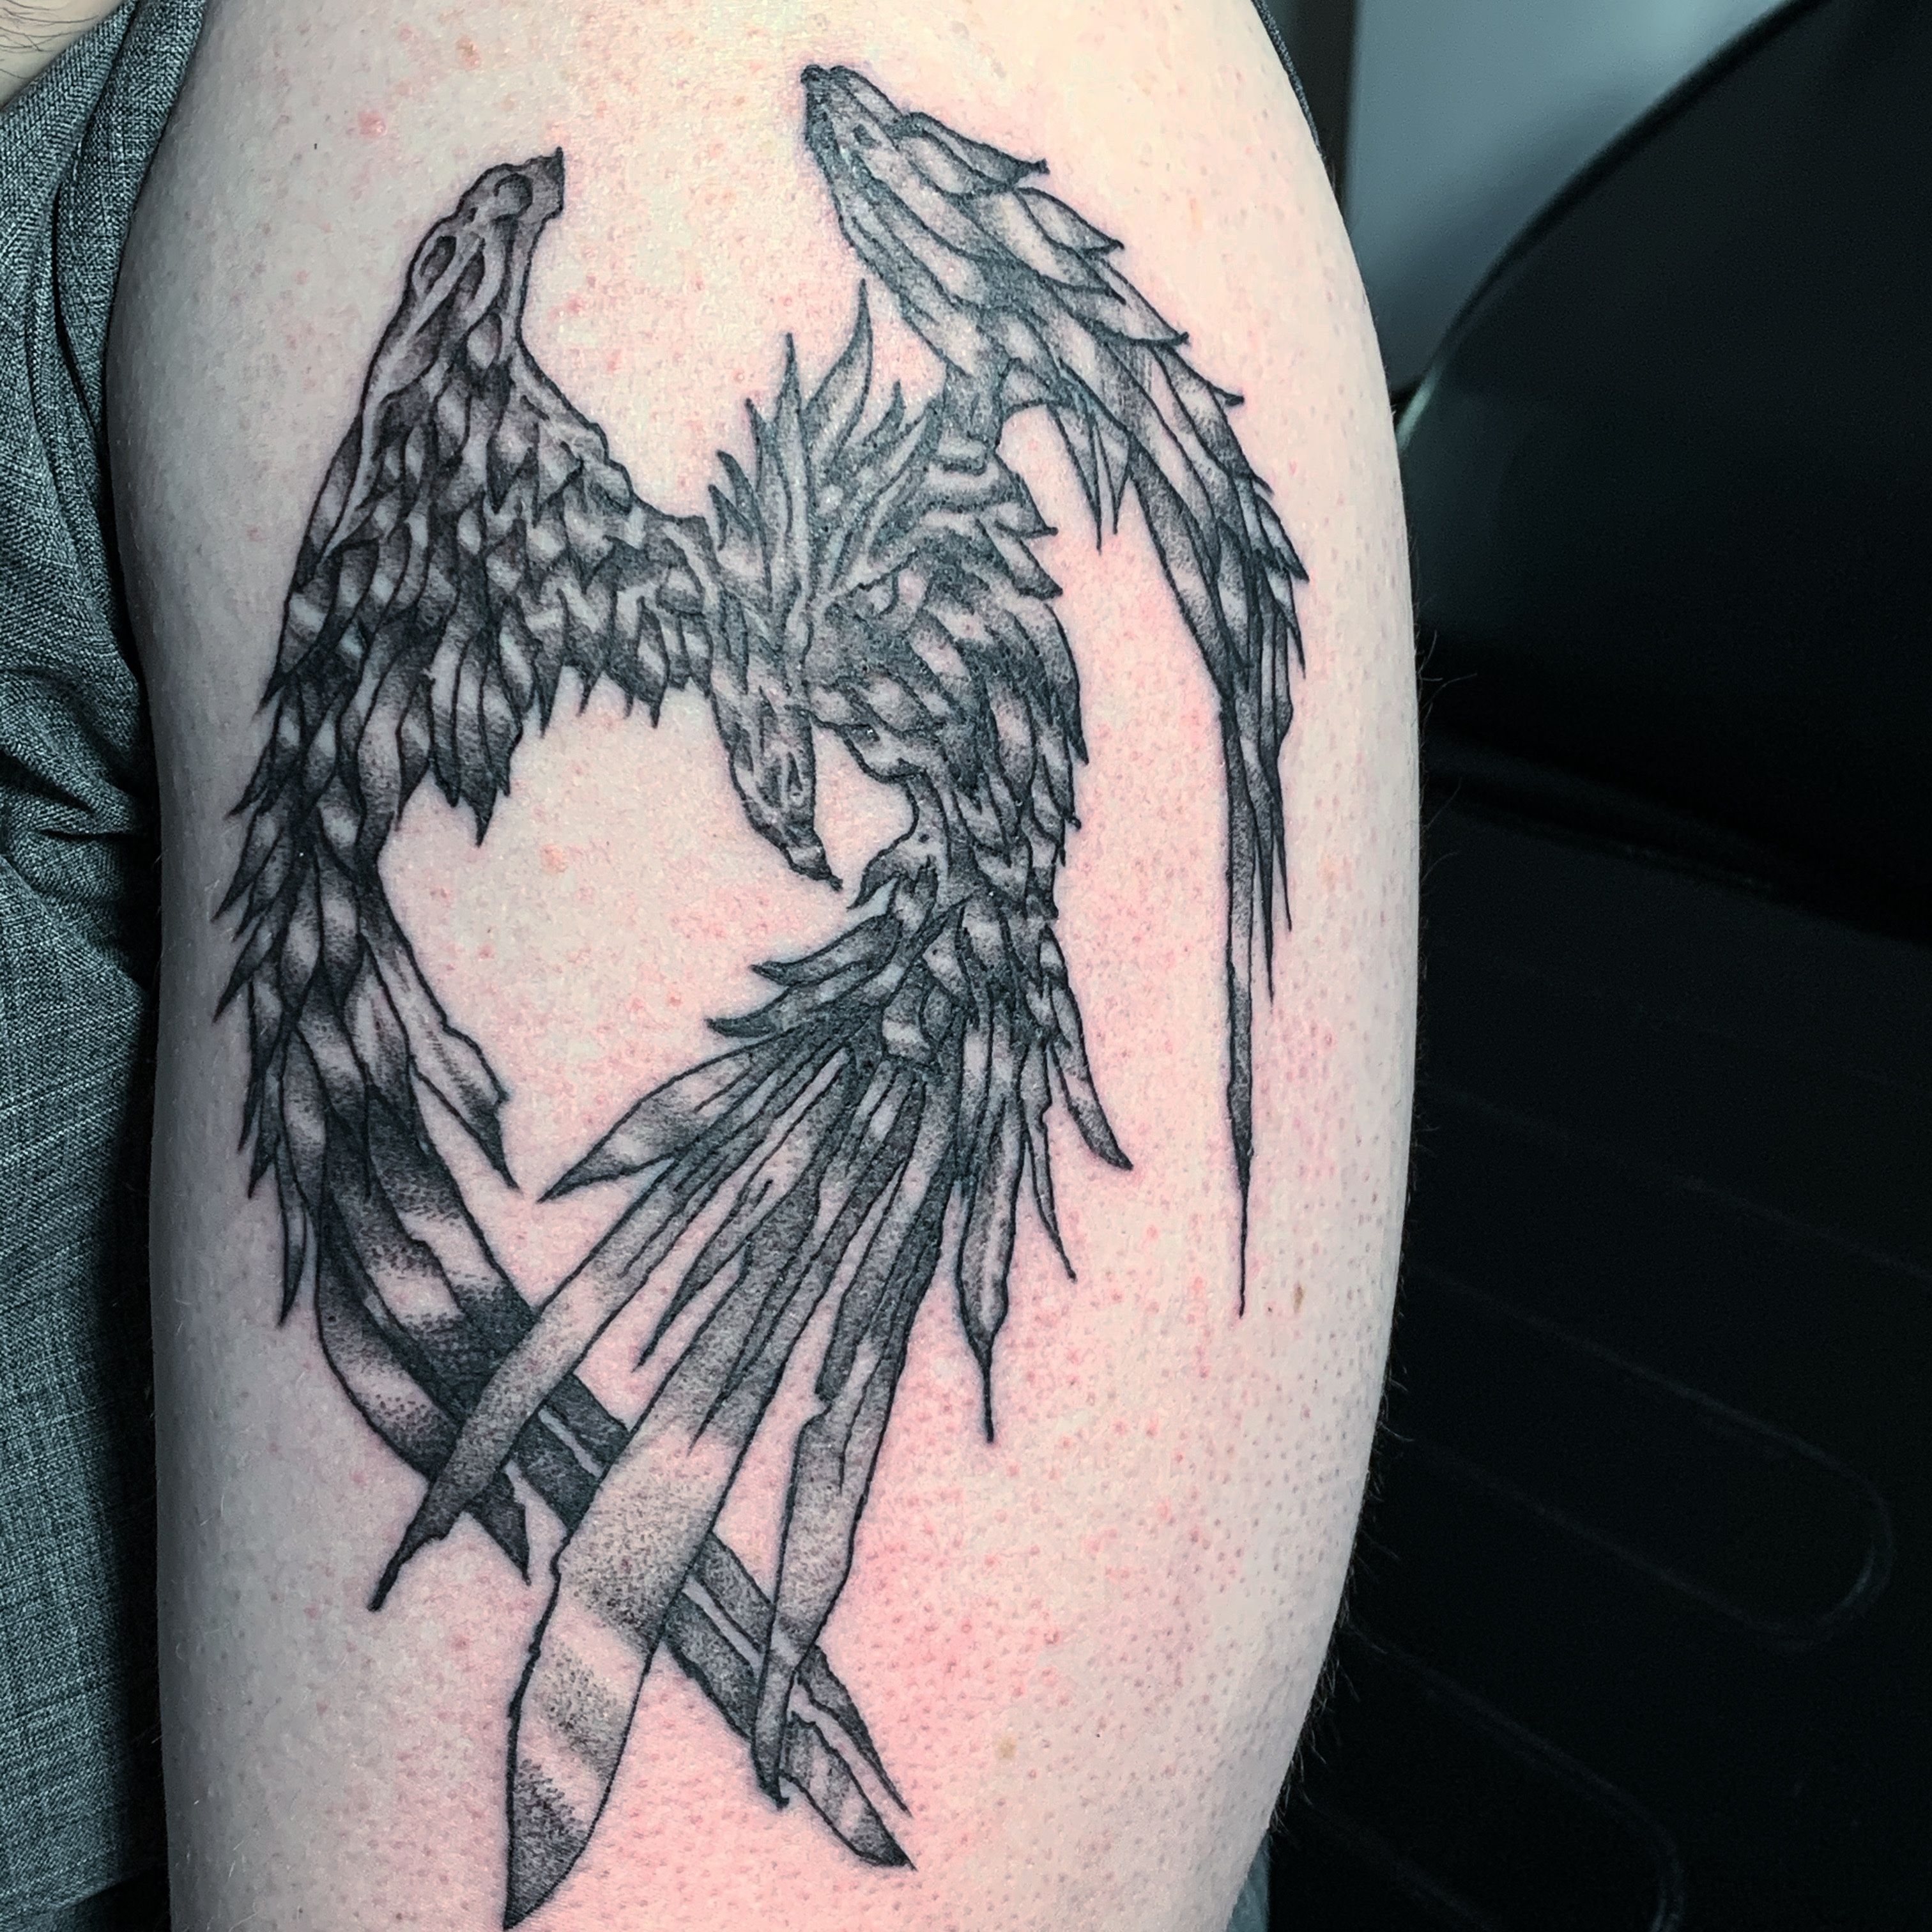 Phoenix done by Rome at Homesick in Morehead, KY : r/TattooDesigns